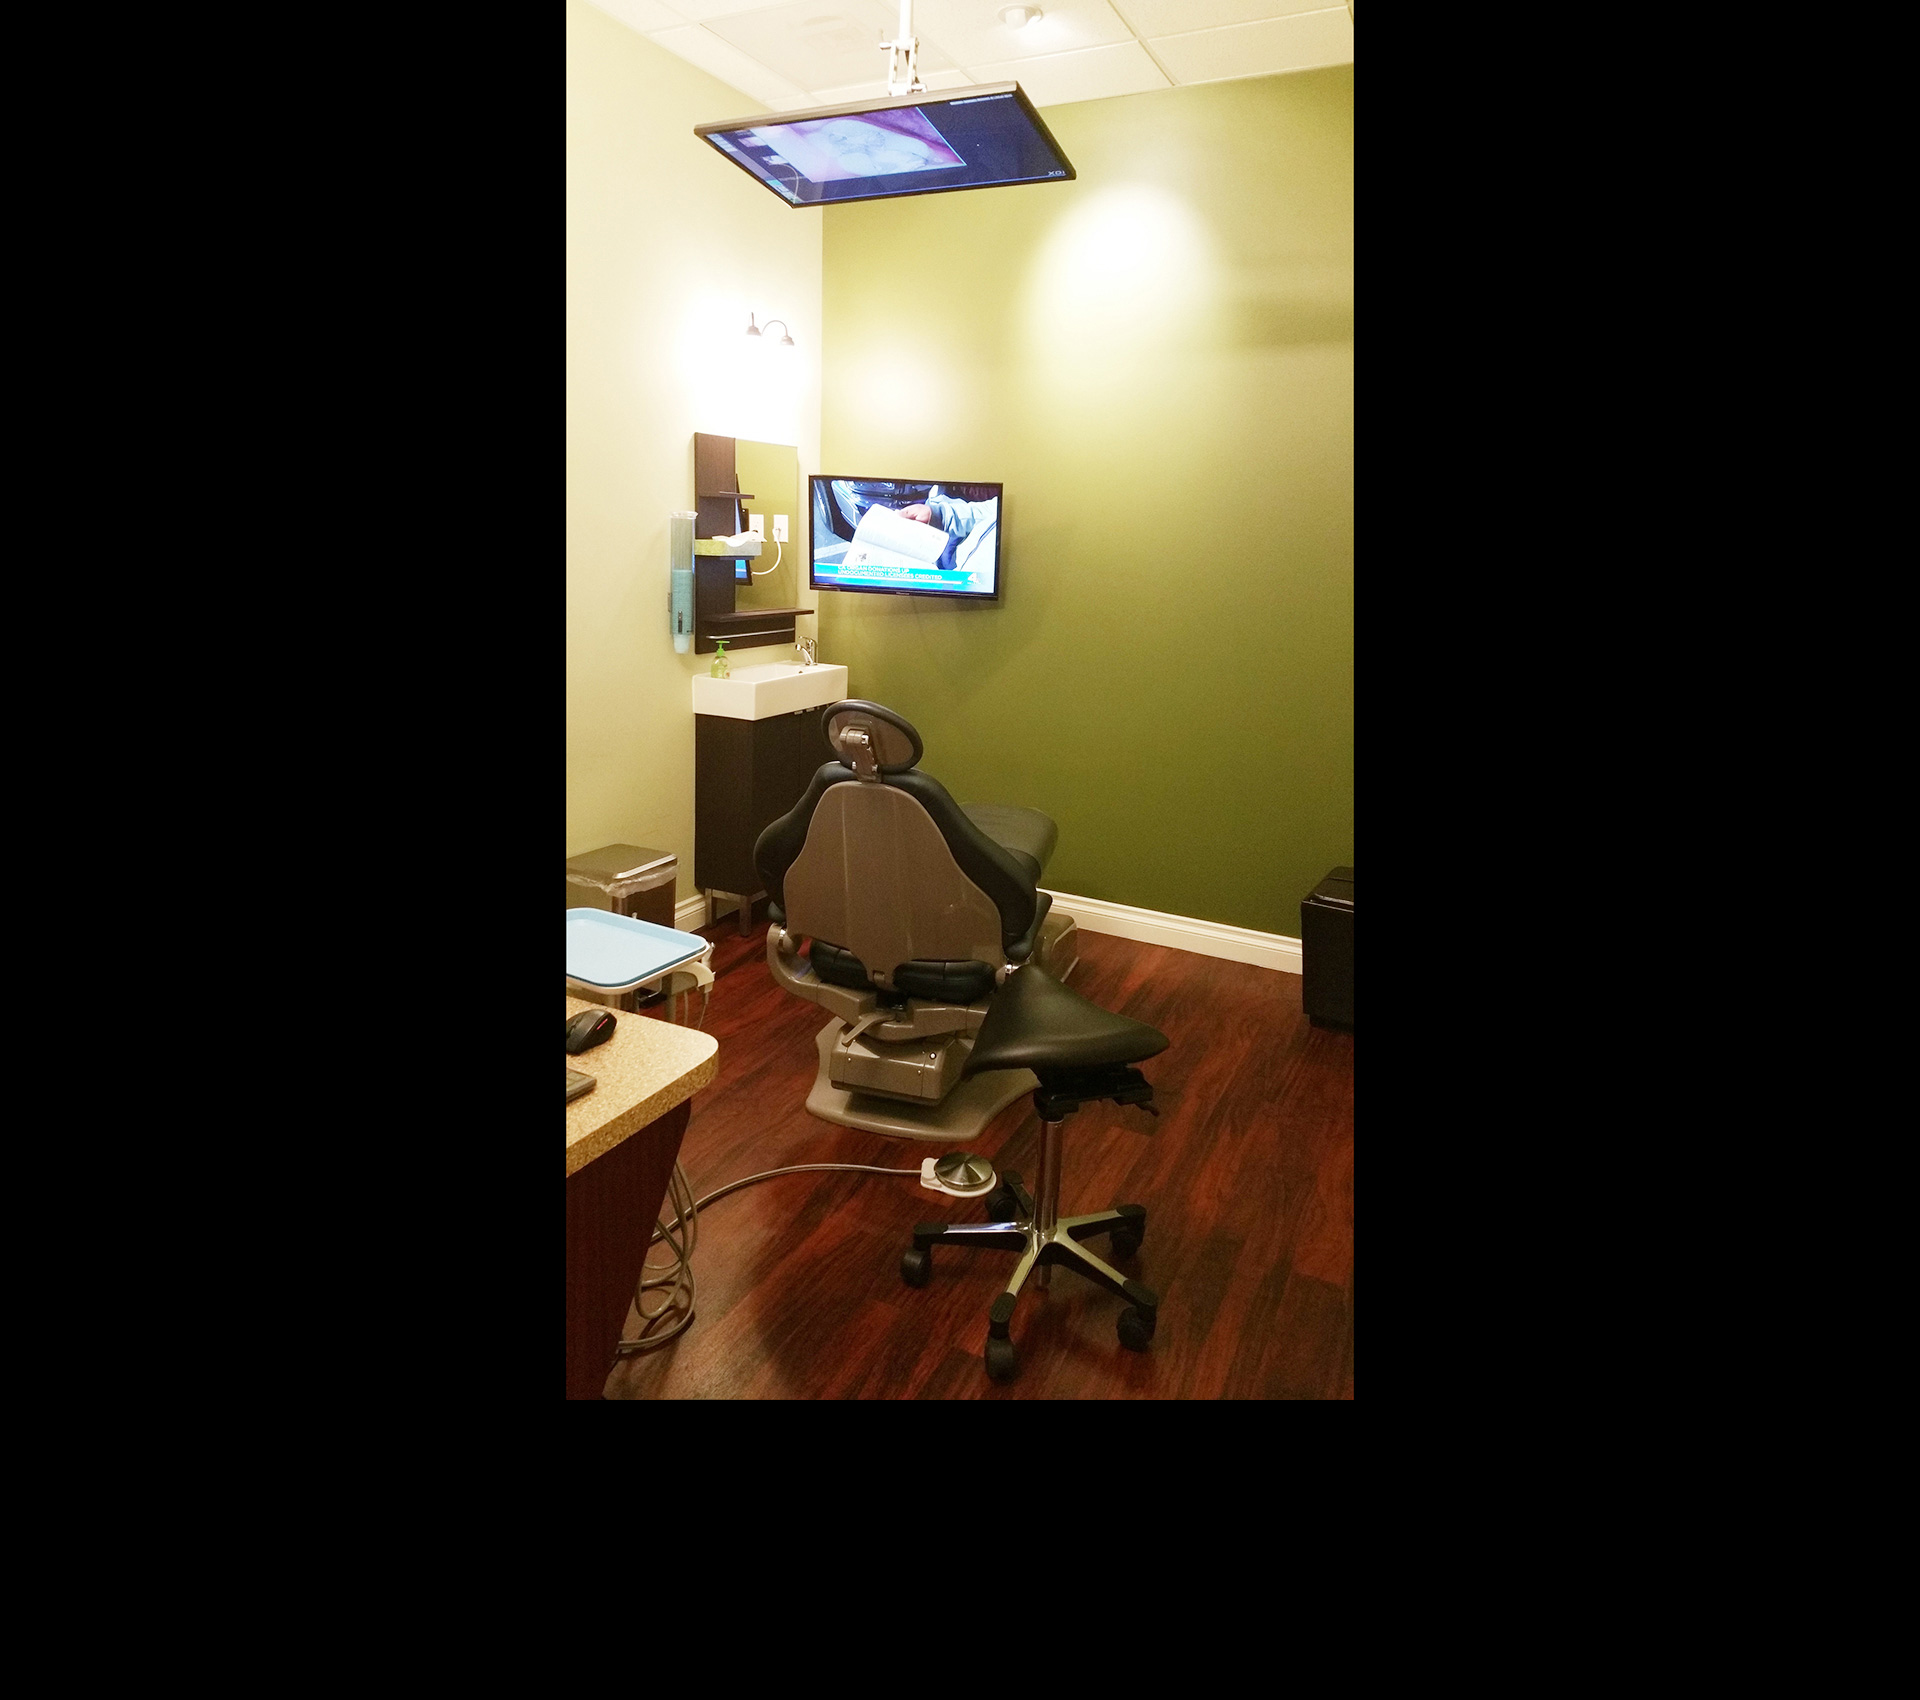 Our operatories are set up in such way that you can see a live view of inside your mouth or your X-rays while you are lying down. We can also switch to a satellite TV to tune to your favorite show/channel. If you happen to wait just a bit to start your treatment, you can watch TV while sitting up as well.